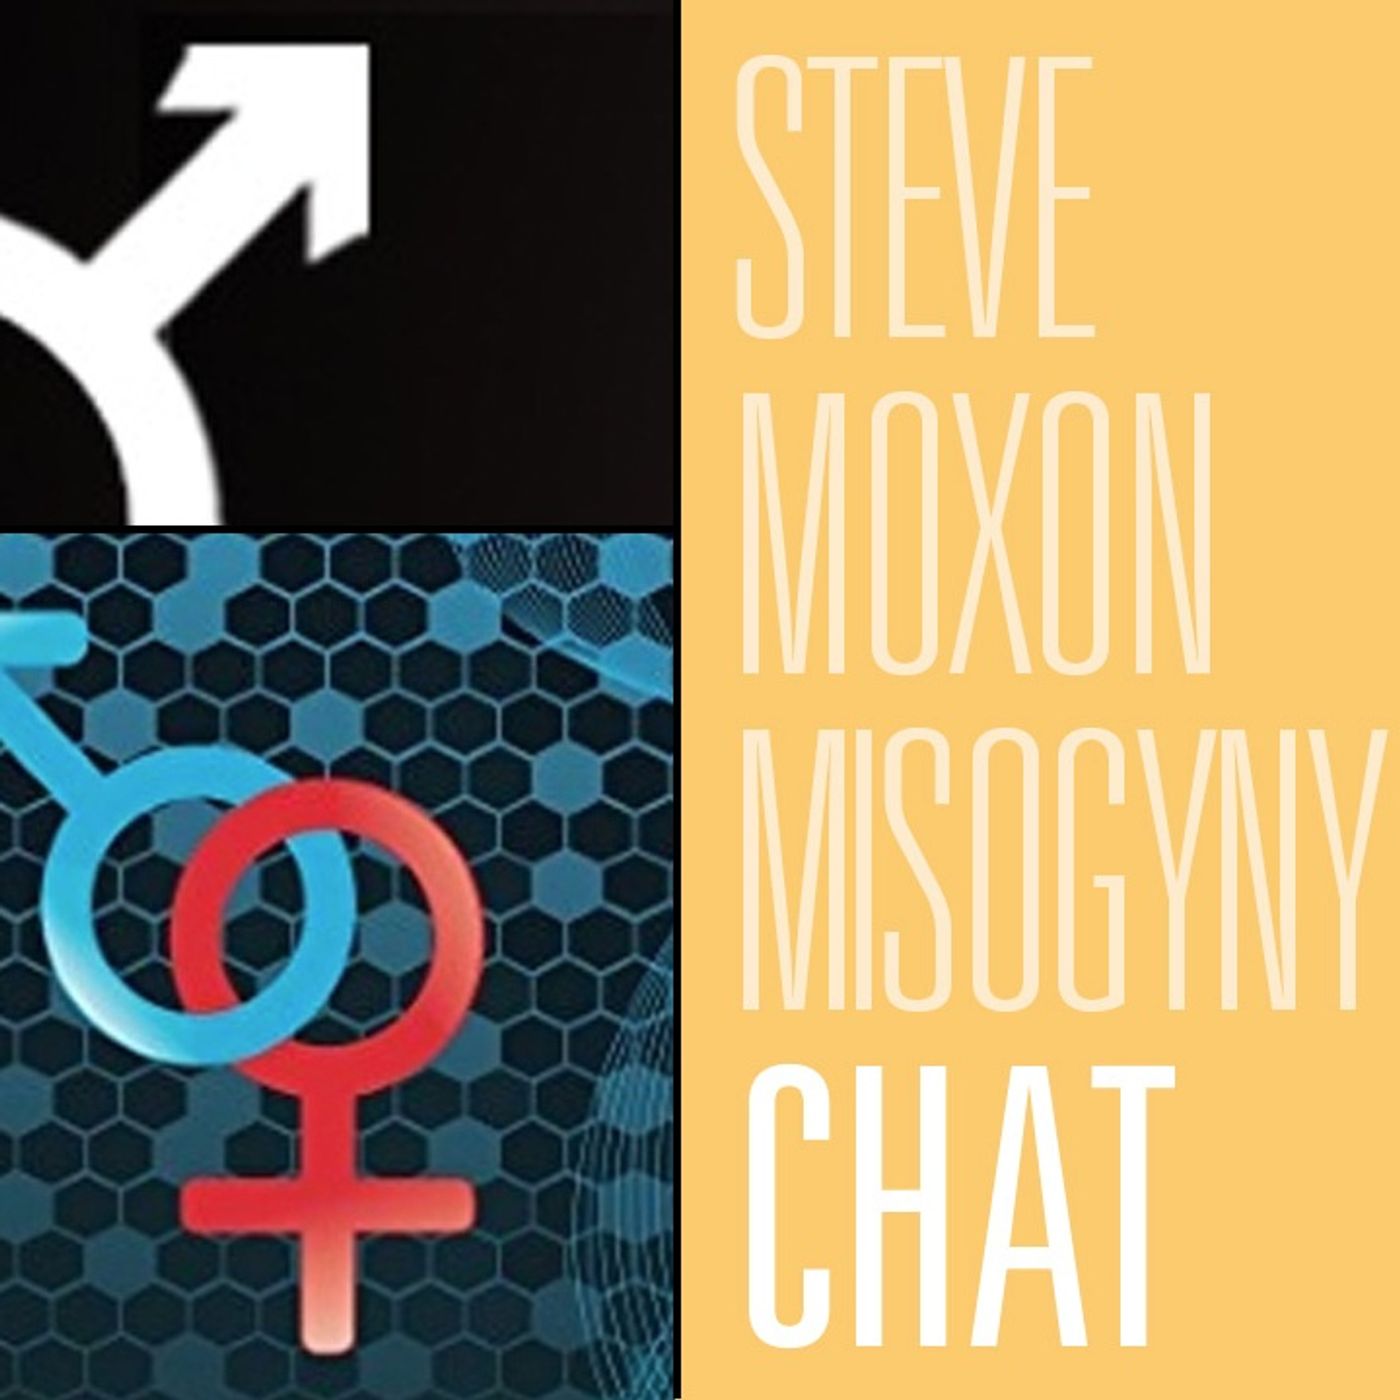 Misogyny Deboonked? Speaking With Researcher Steve Moxon | Fireside Chat 185